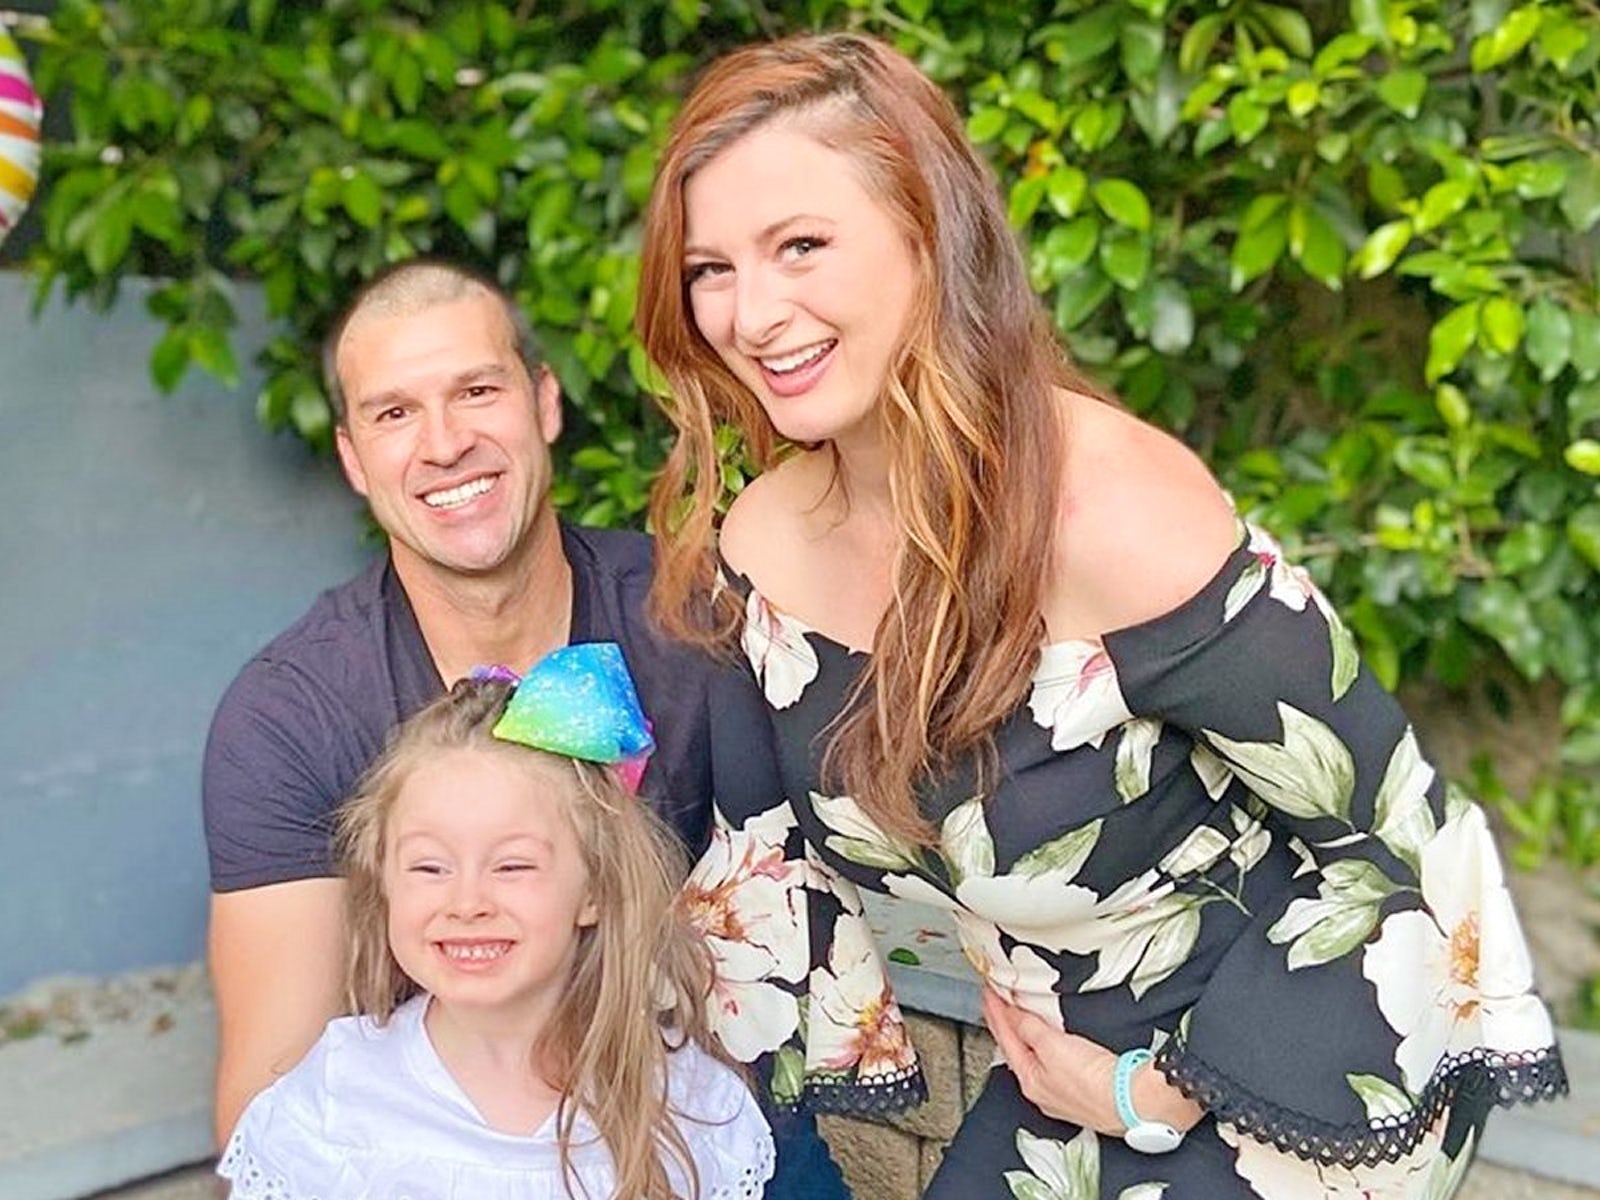 'Big Brother' couple Rachel Reilly and Brendon Villegas expecting